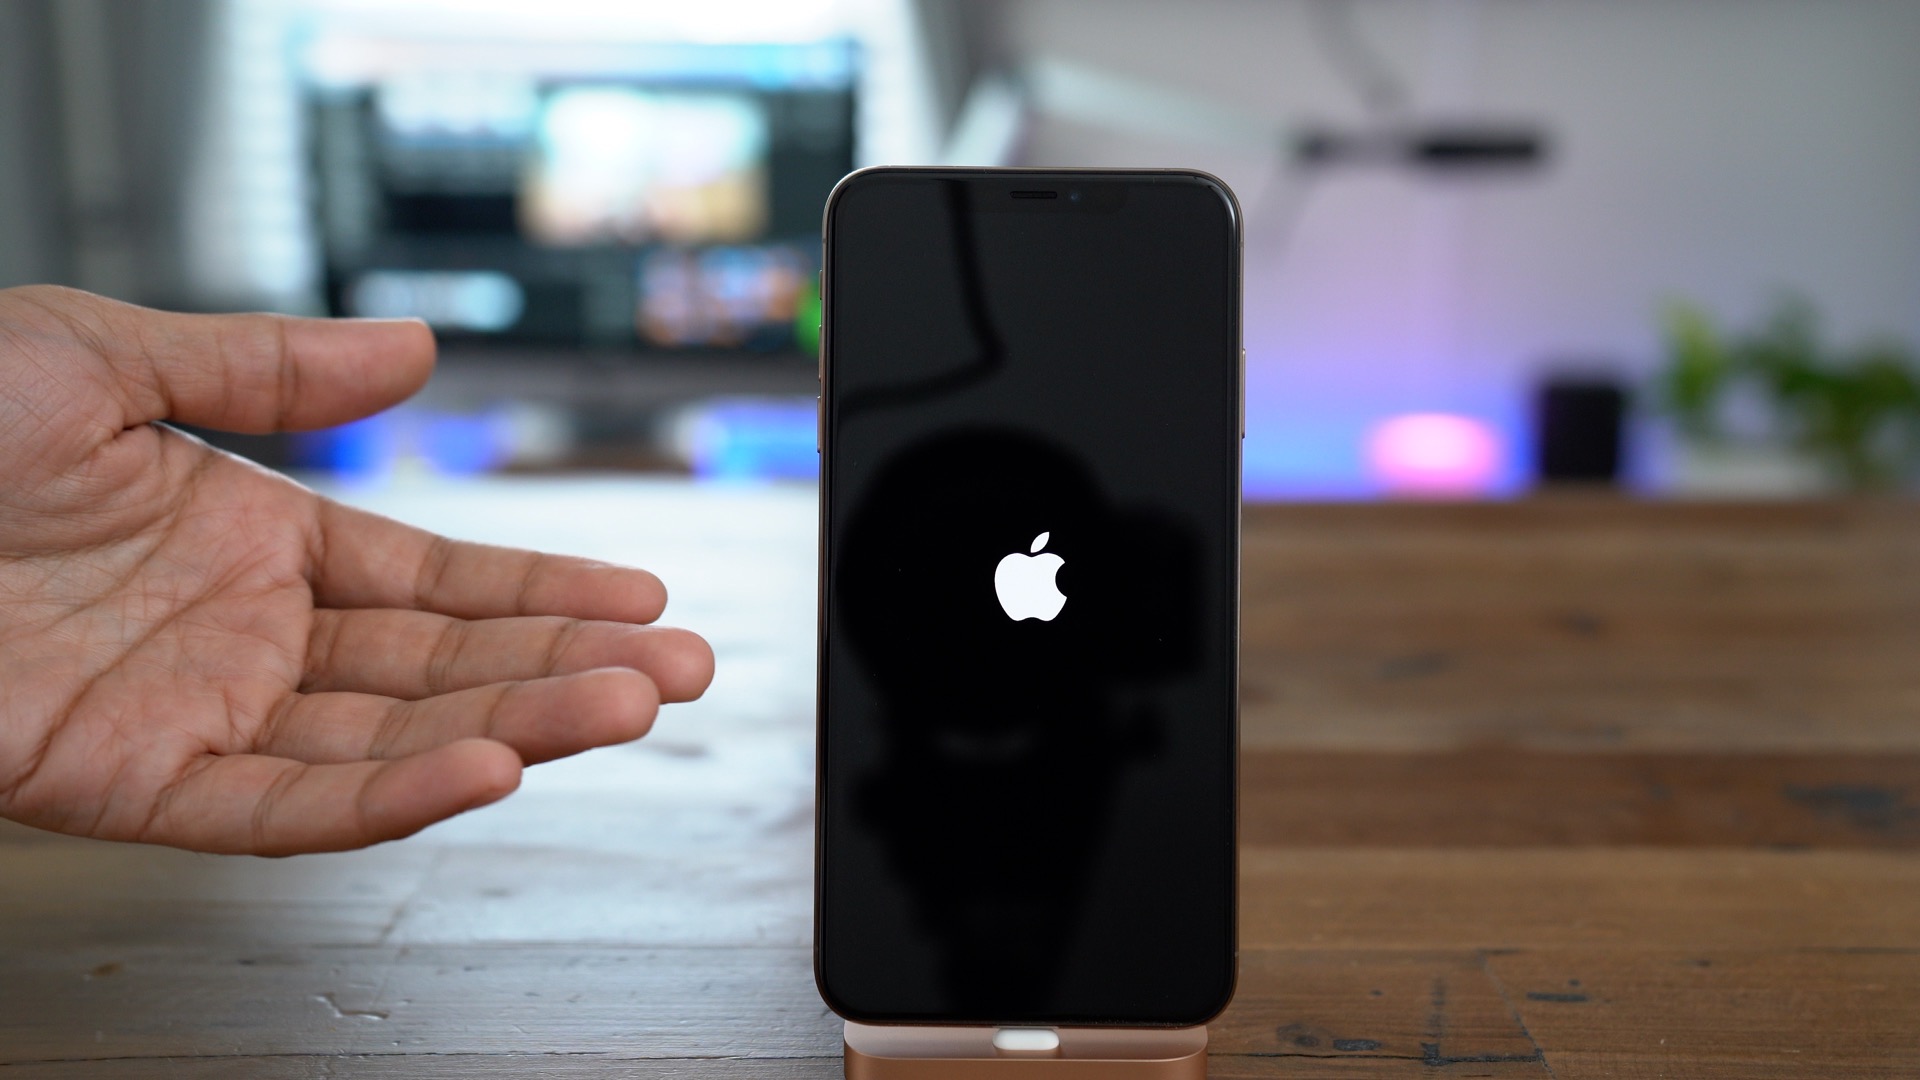 IPhone 11 Hard Reset: Force Restarting And Resolving Issues